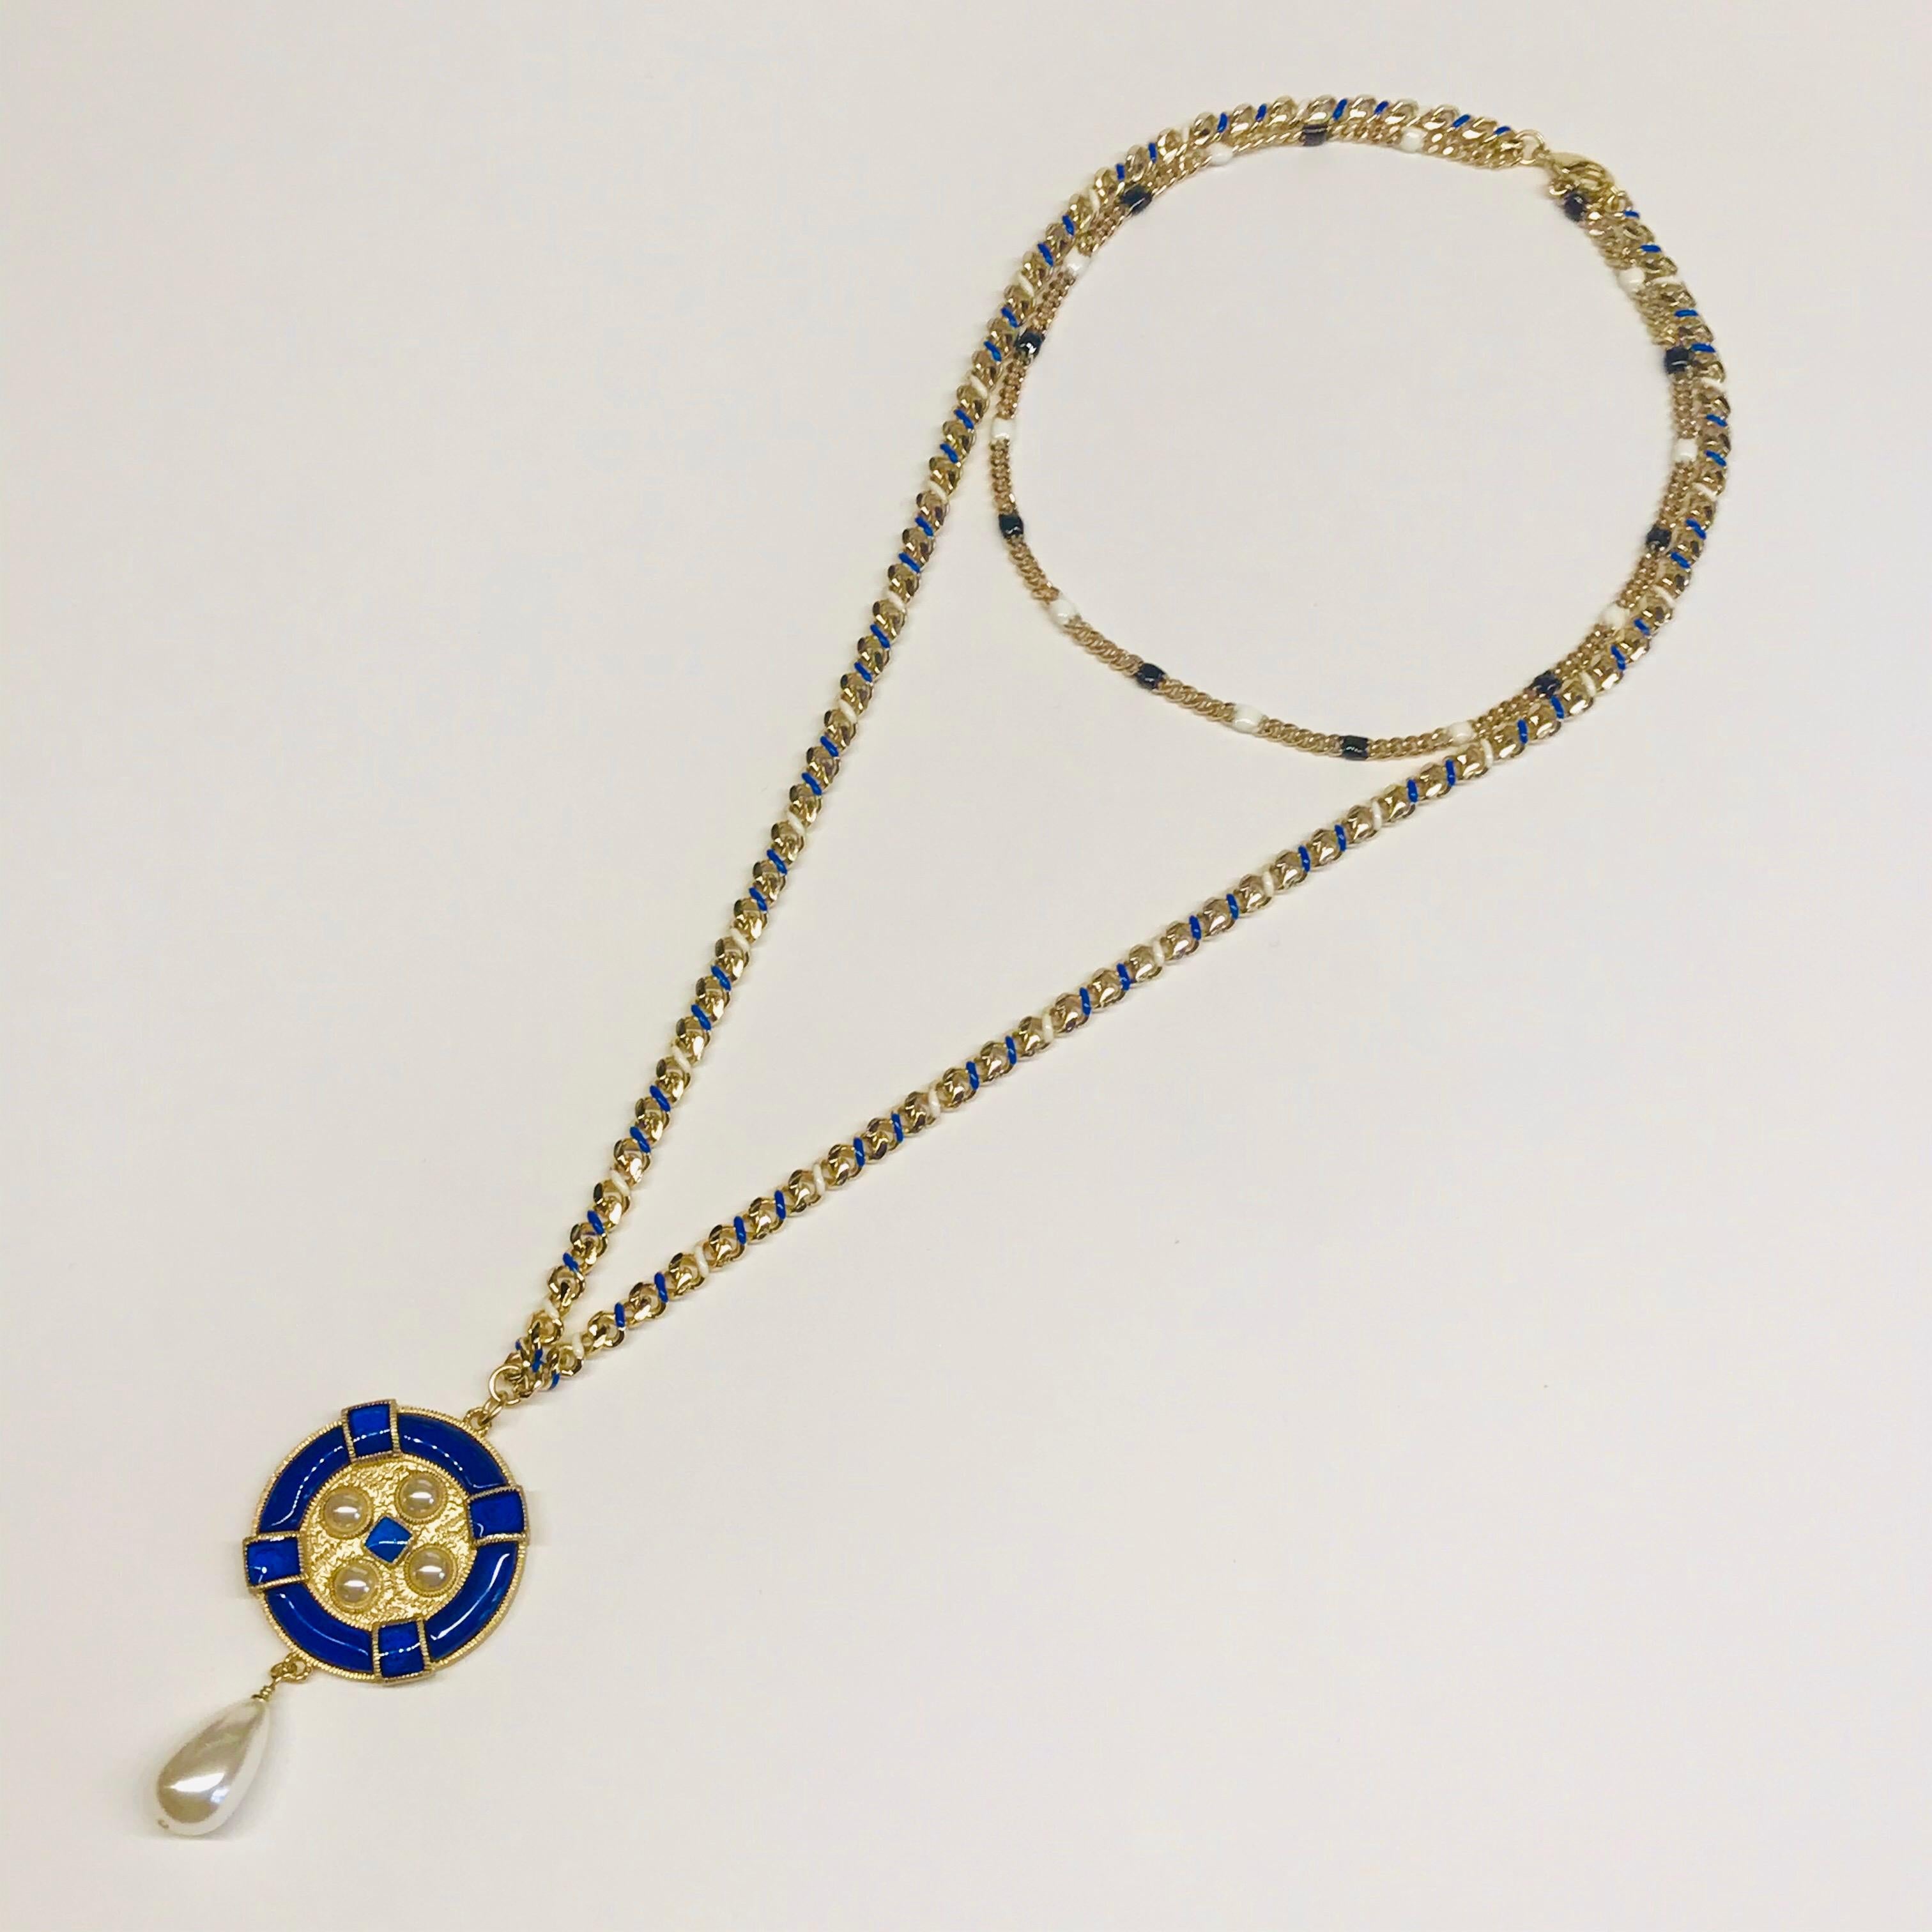 A fabulous Chanel 2019 cruise collection gold tone with white and blue enamel accents double strand pendant necklace. The disk pendant is 1.5” in diameter. The total height of the pendant including the faux pear pearl is 2.5.” The shorter curb link